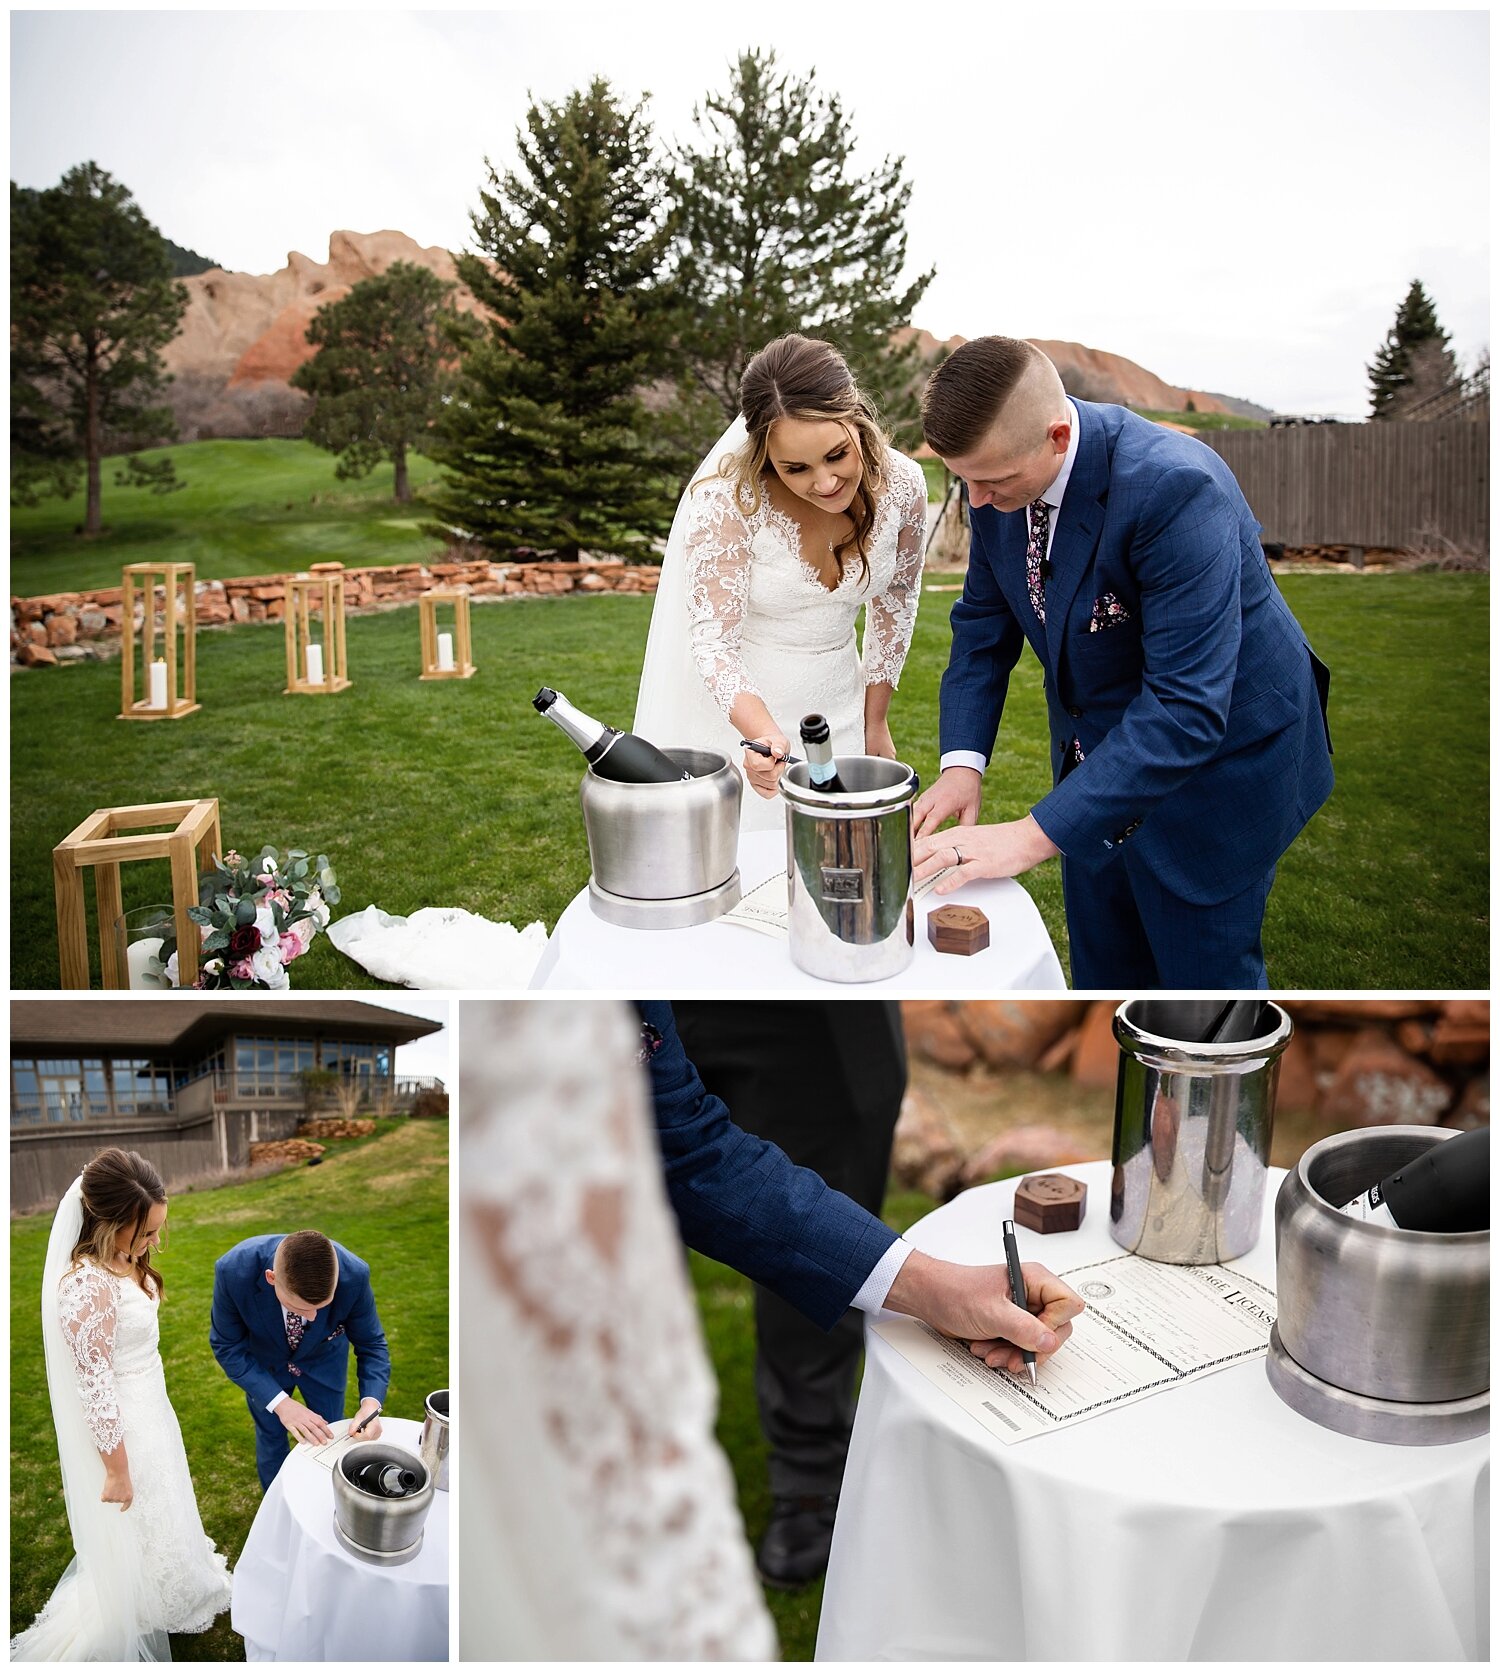 Molly and Nick's Wedding Day|Arrowhead Golf Course Elopement_0047.jpg